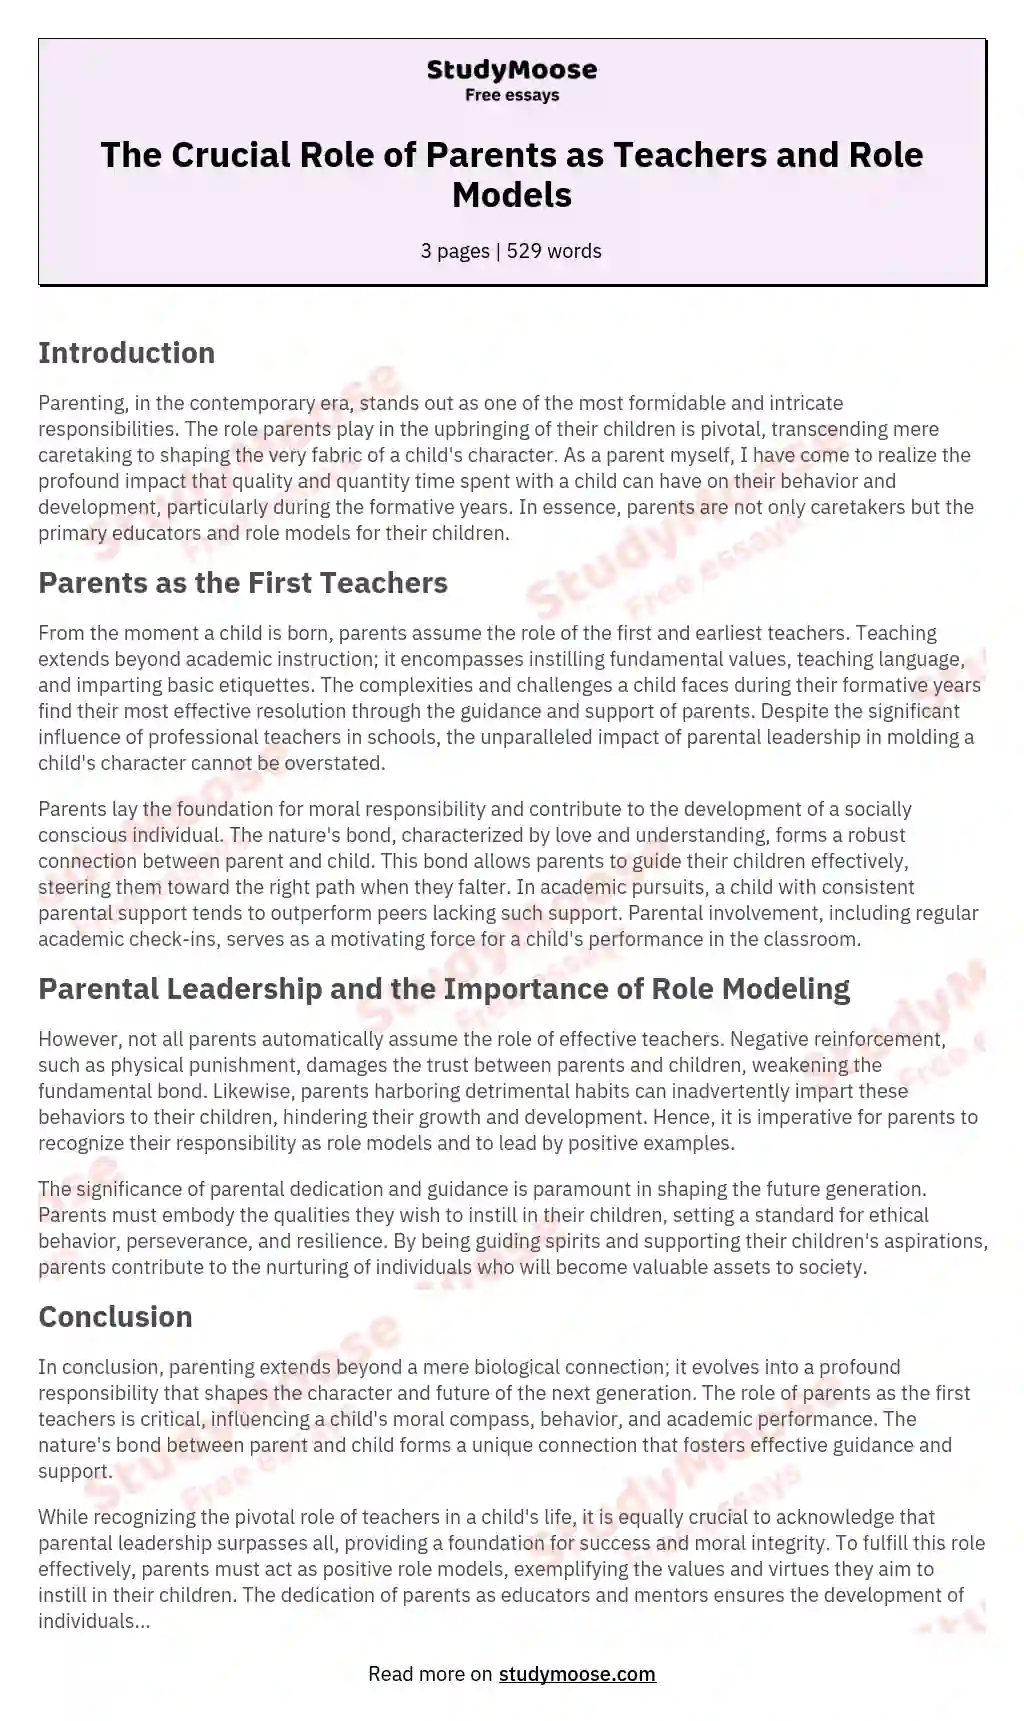 The Crucial Role of Parents as Teachers and Role Models essay